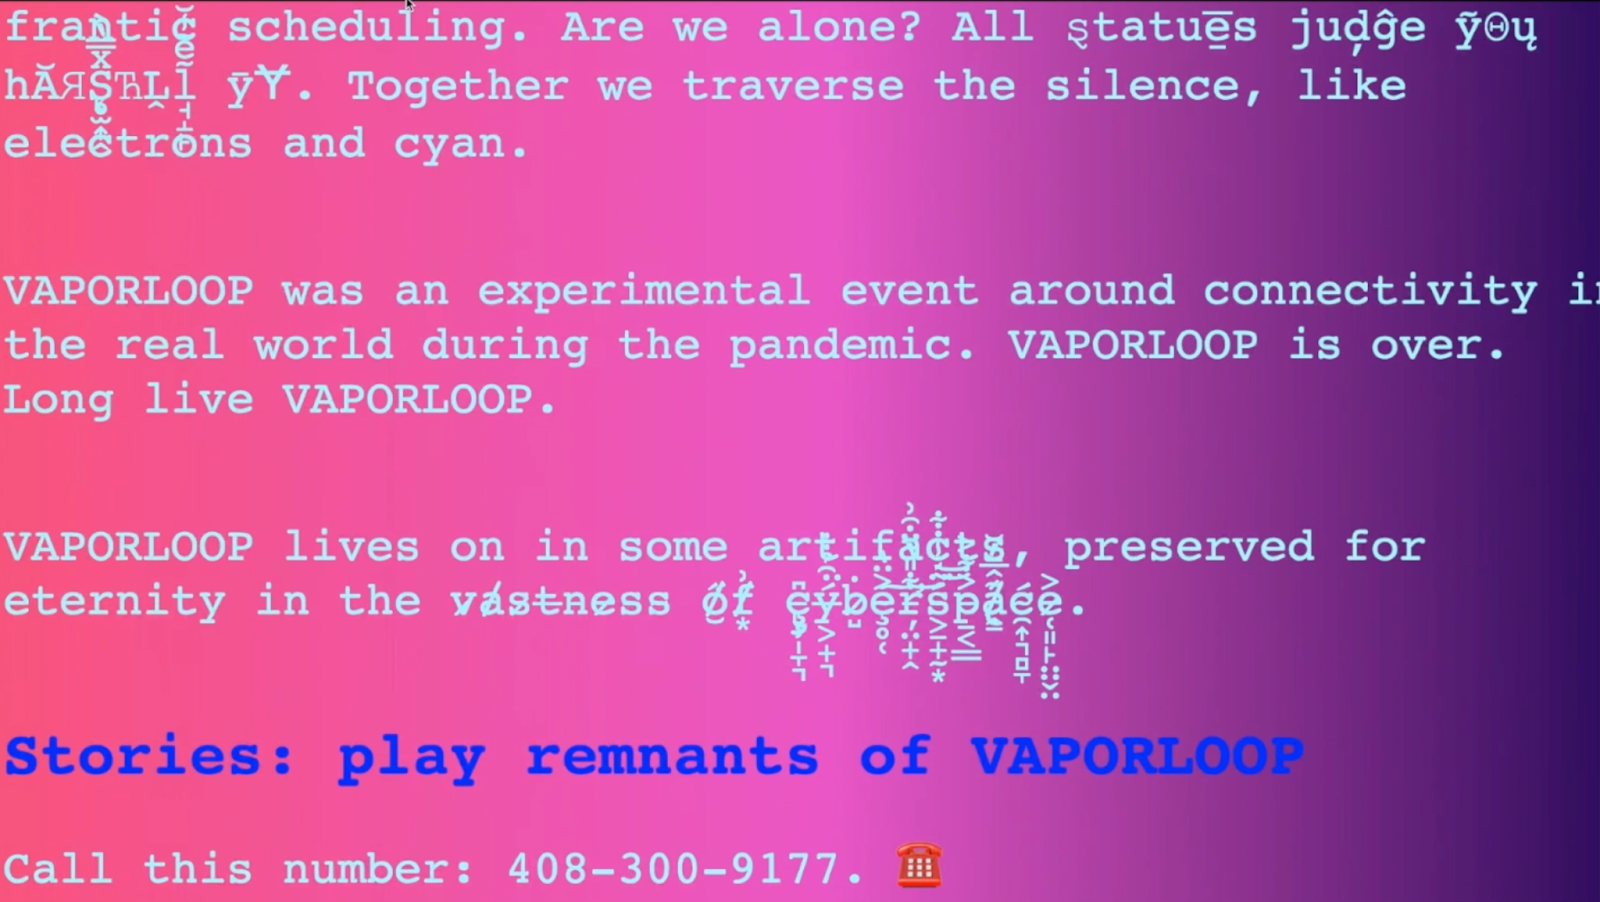 A pink to purple gradient image with glitchy text that says "Vaporloop was an experimental event around connectivity in the real world during the pandemic. Vaporloop is over. Long live vaporloop. Vaporloop lives on in some artifacts, preserved for eternity in the vastness of cyberspace. Stories: play remnants of Vaporloop. Call this number: 408-300-9177"